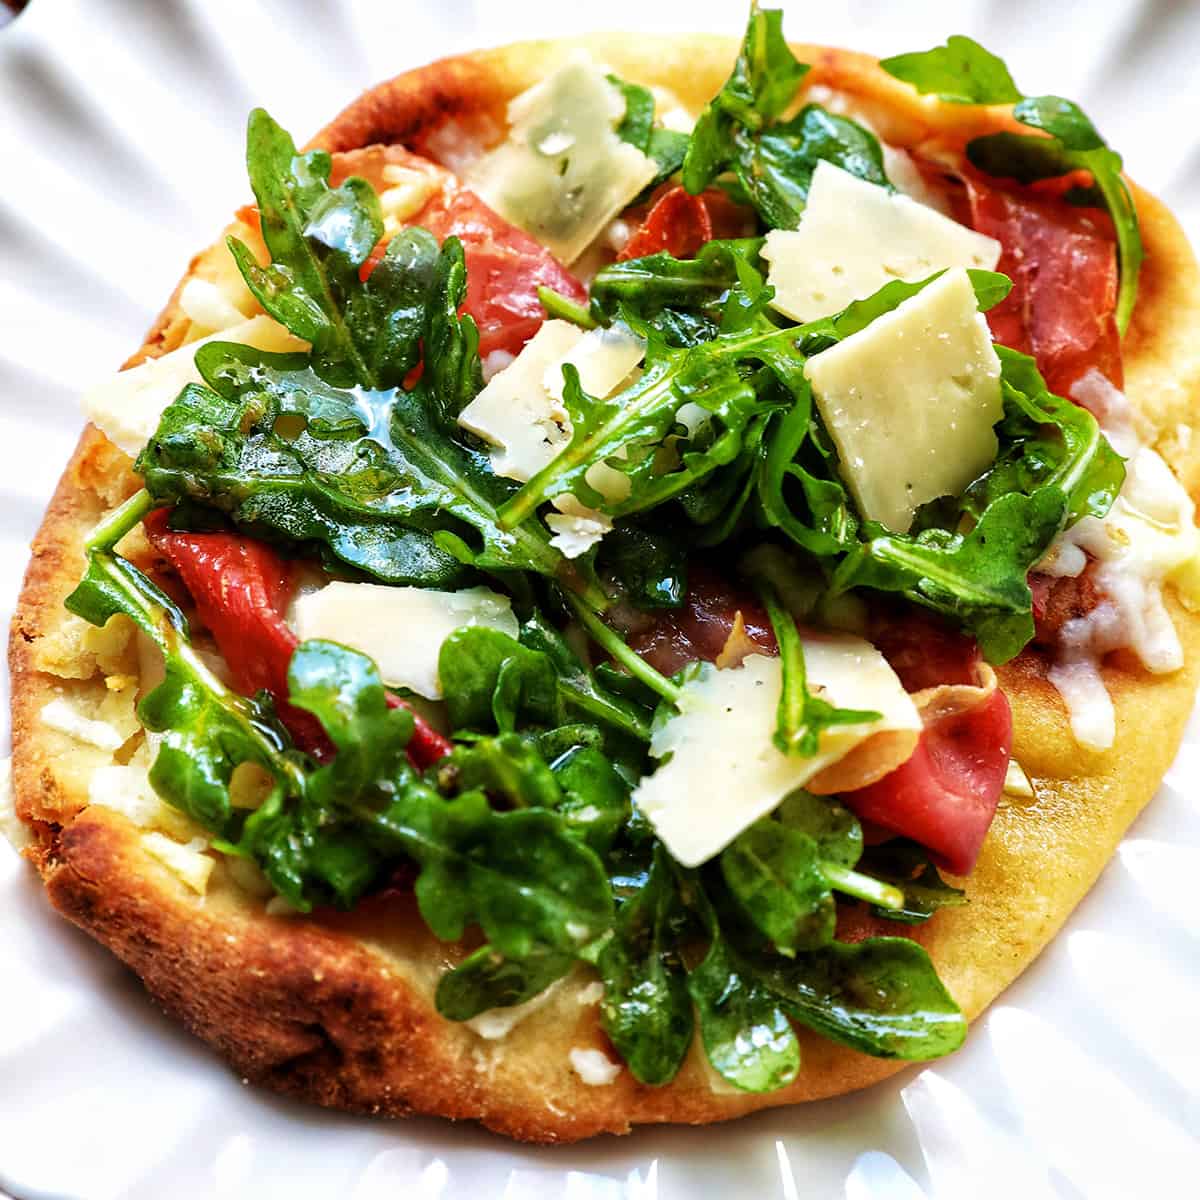 prosciutto flatbread with arugula and parmesan cheese on a scalloped plate.